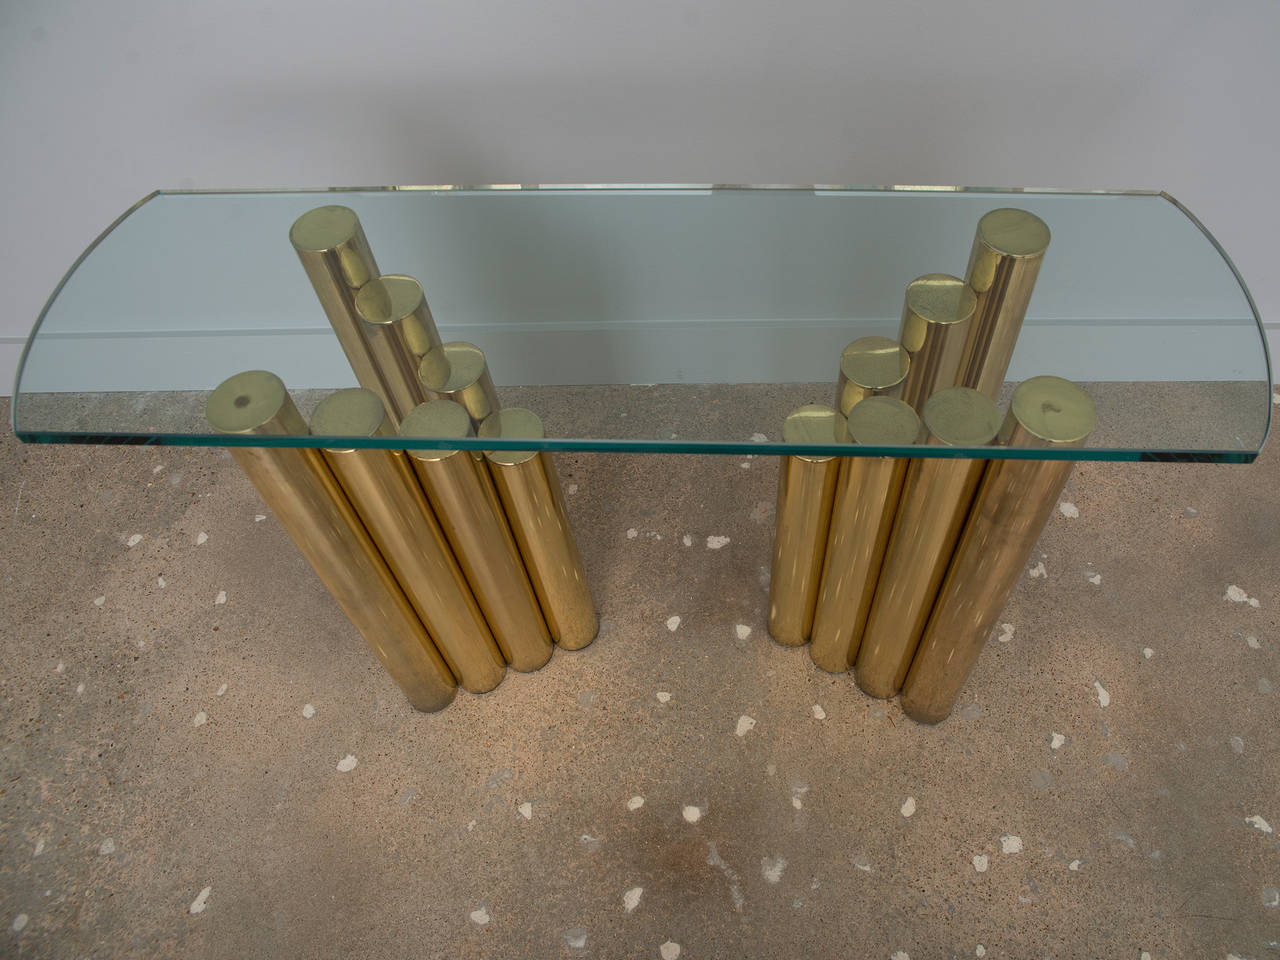 Tubular brass plated stacking console - an unusual statement piece with a thick curved glass top.